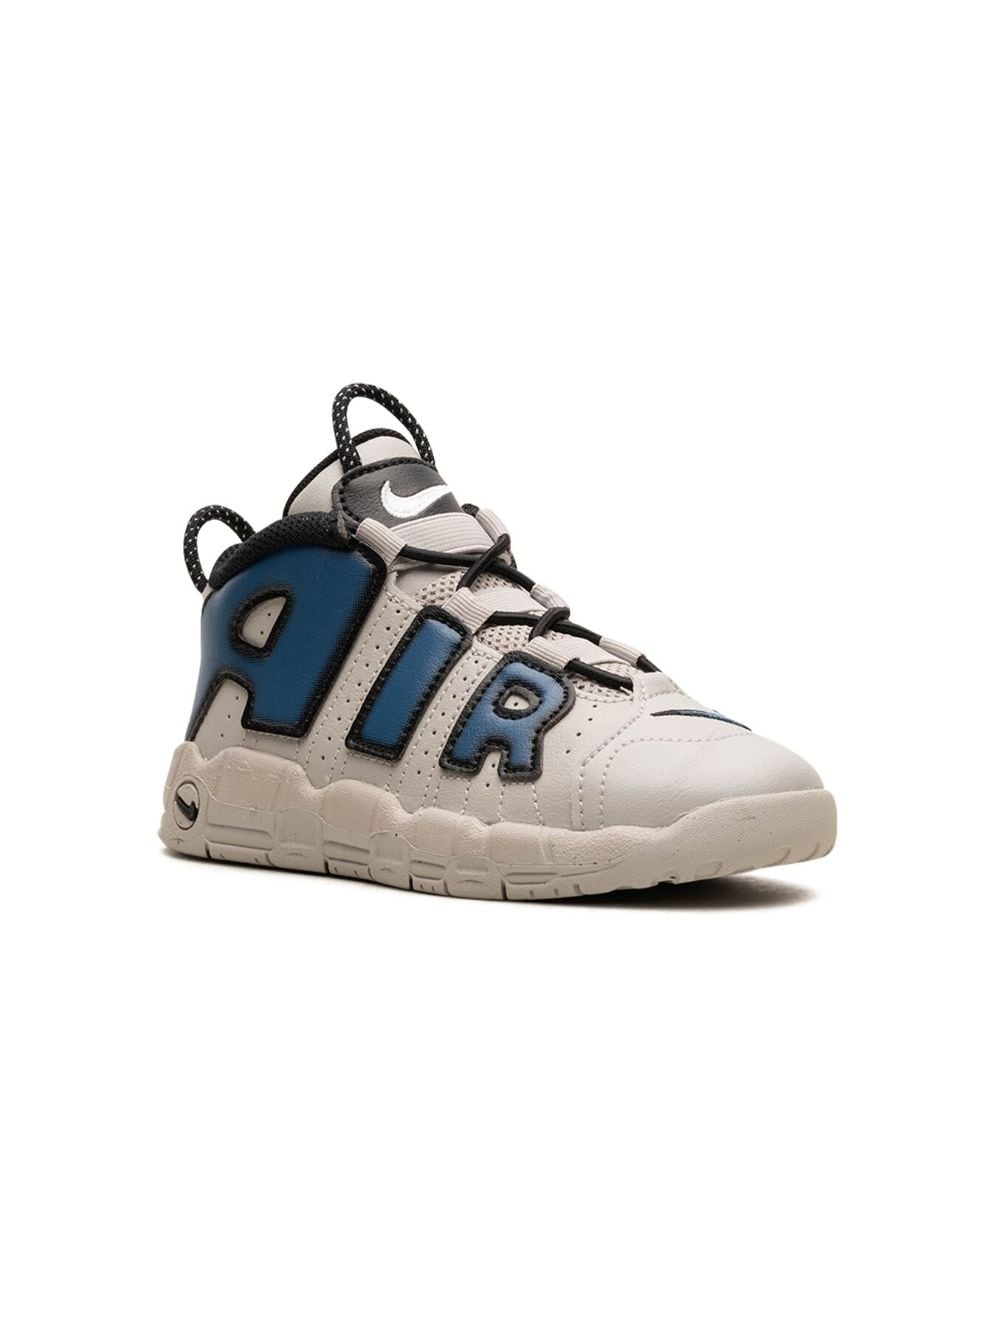 Nike Kids Air More Uptempo "Industrial Blue" sneakers - White von Nike Kids